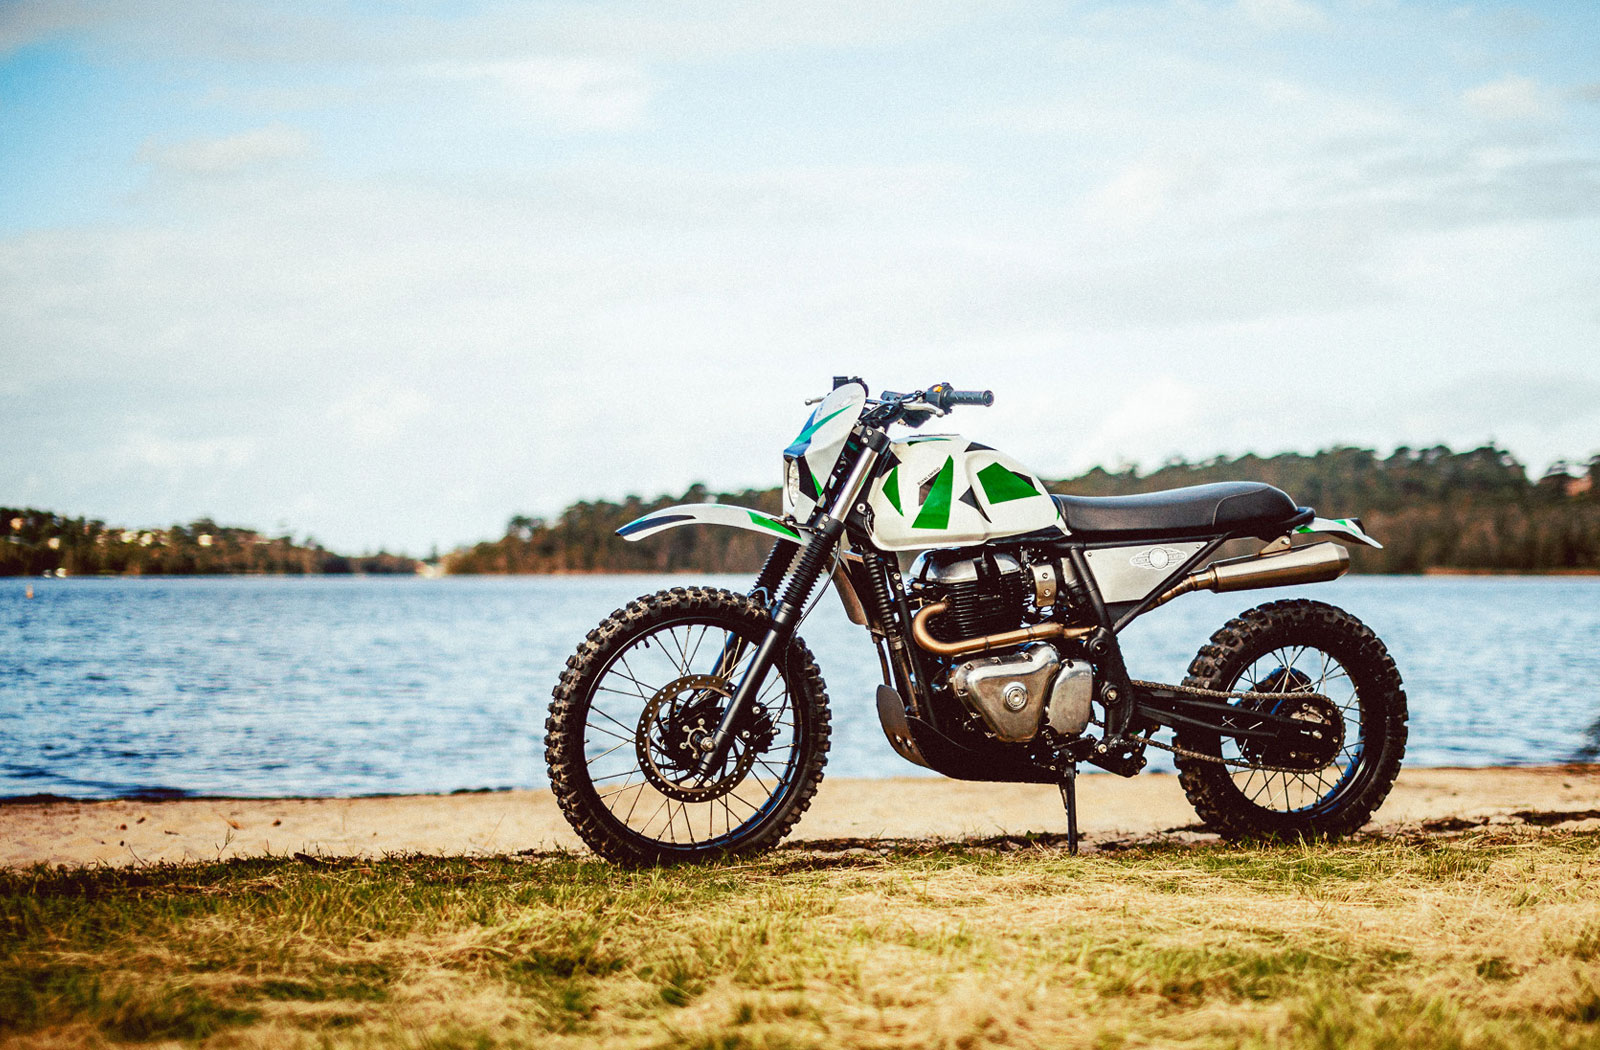 Royal Enfield Himalayan powered with a GT 650 engine